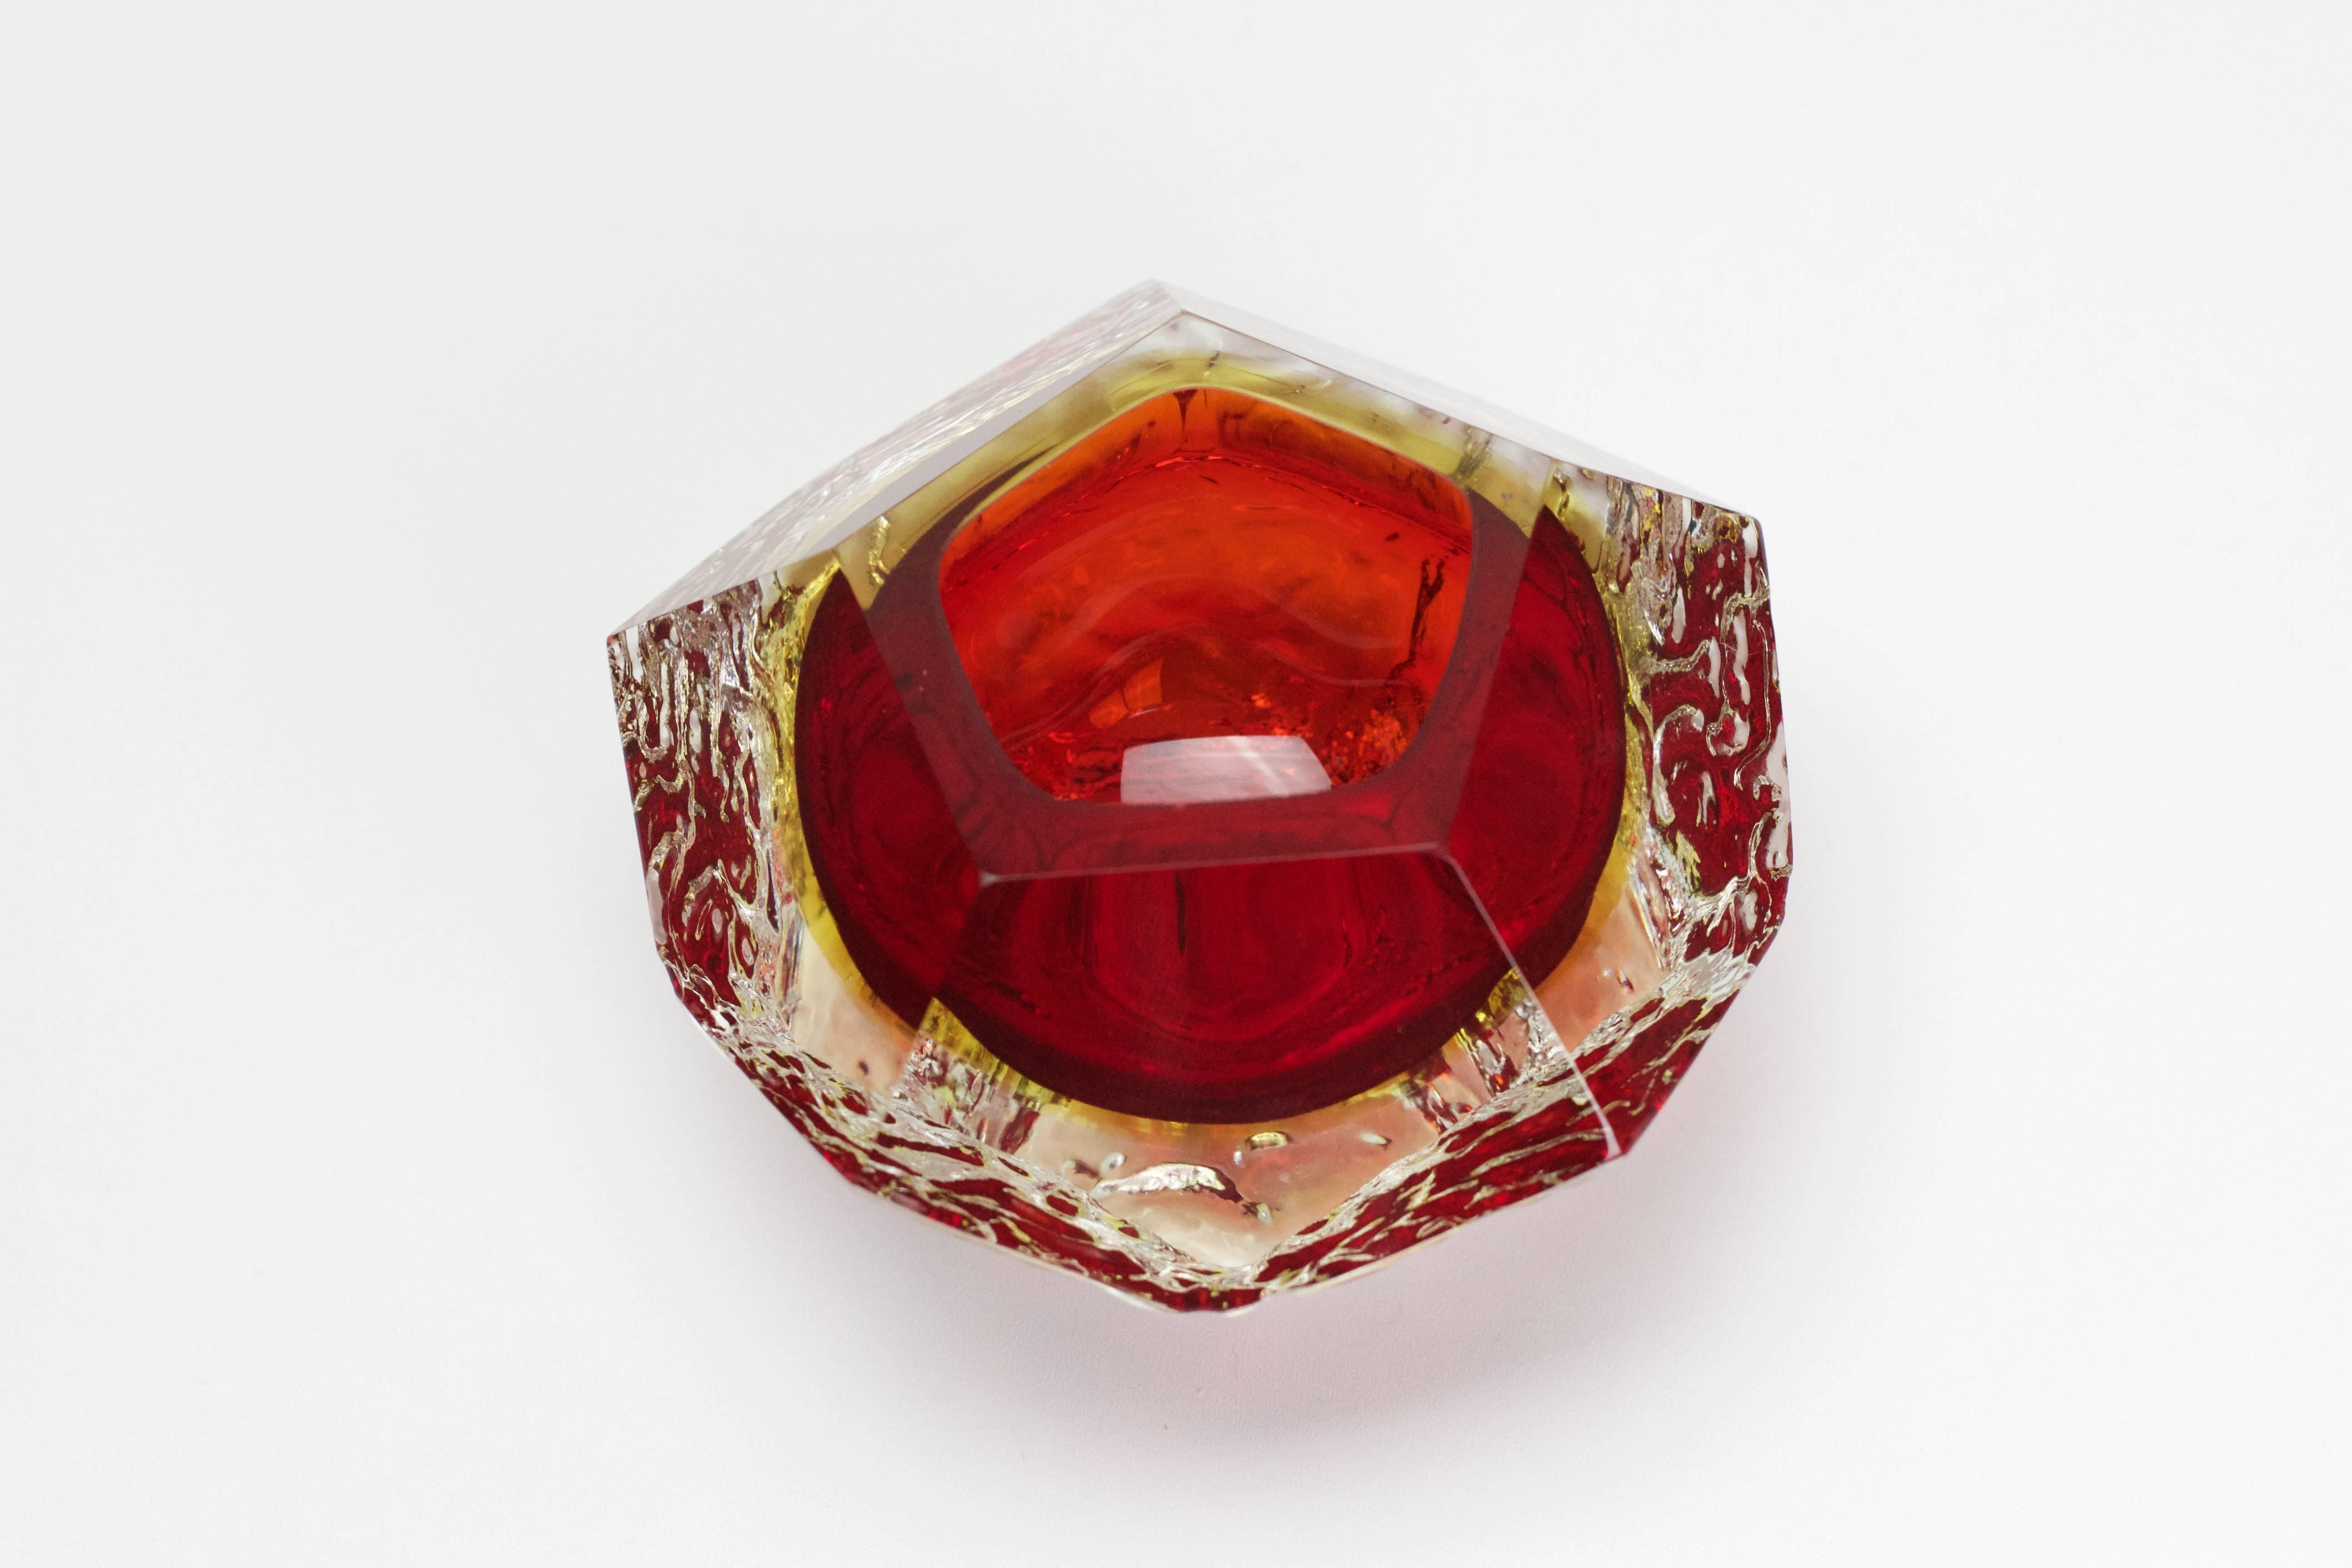 20th Century Textured and Faceted Murano 'Sommerso' Small Glass Bowl by Mandruzzato